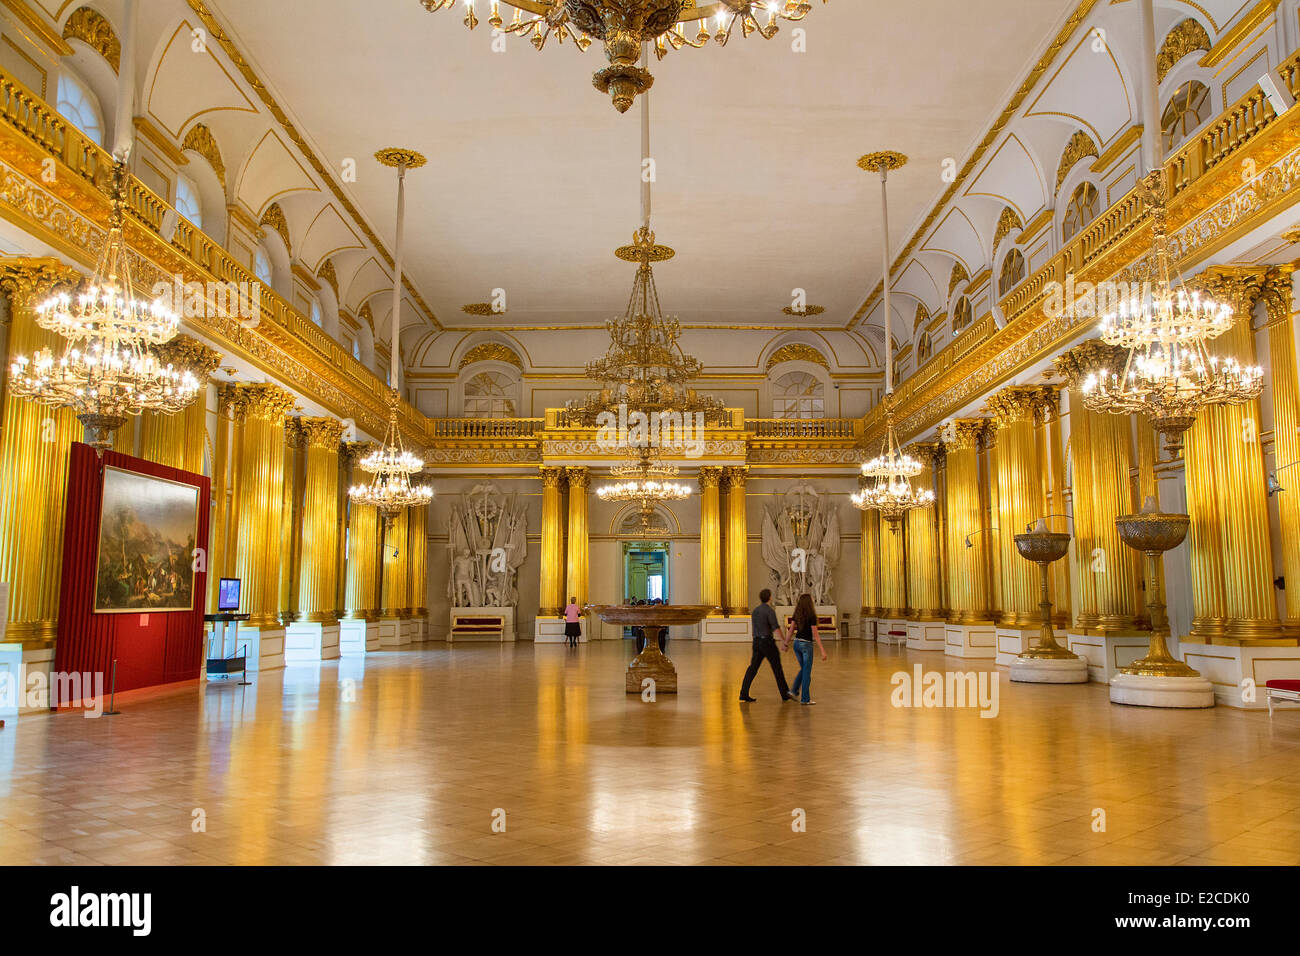 Russia, Saint Petersburg, listed as World Heritage by UNESCO, winter palace, Room 191, the Great Hall Stock Photo